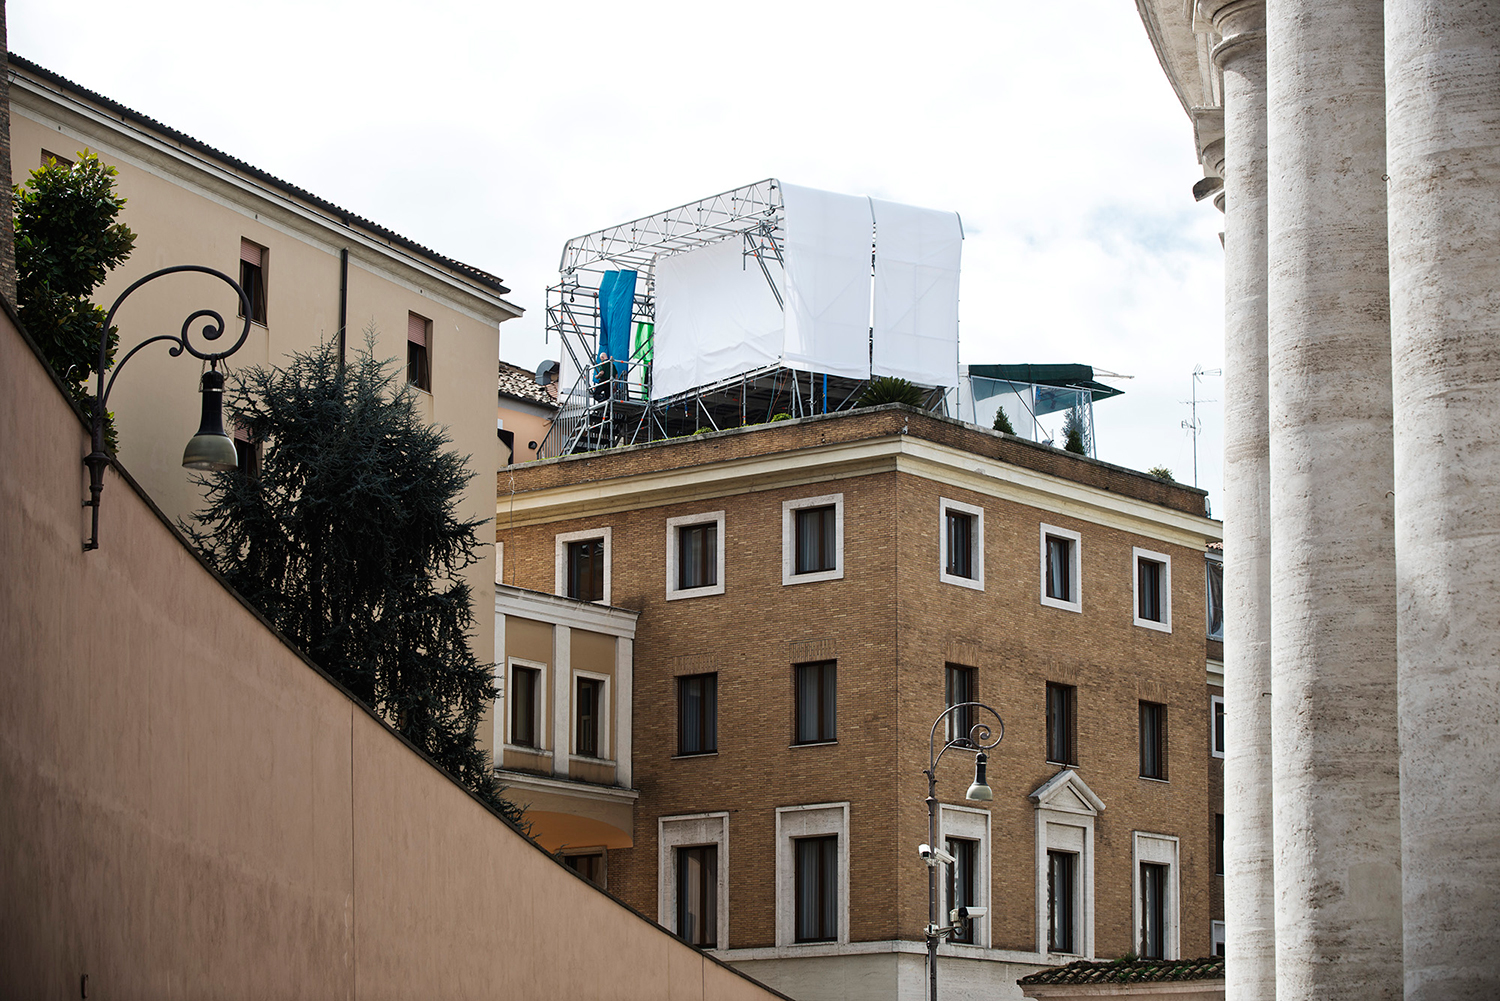 TV Location near the colonnades of St Peter's Square.